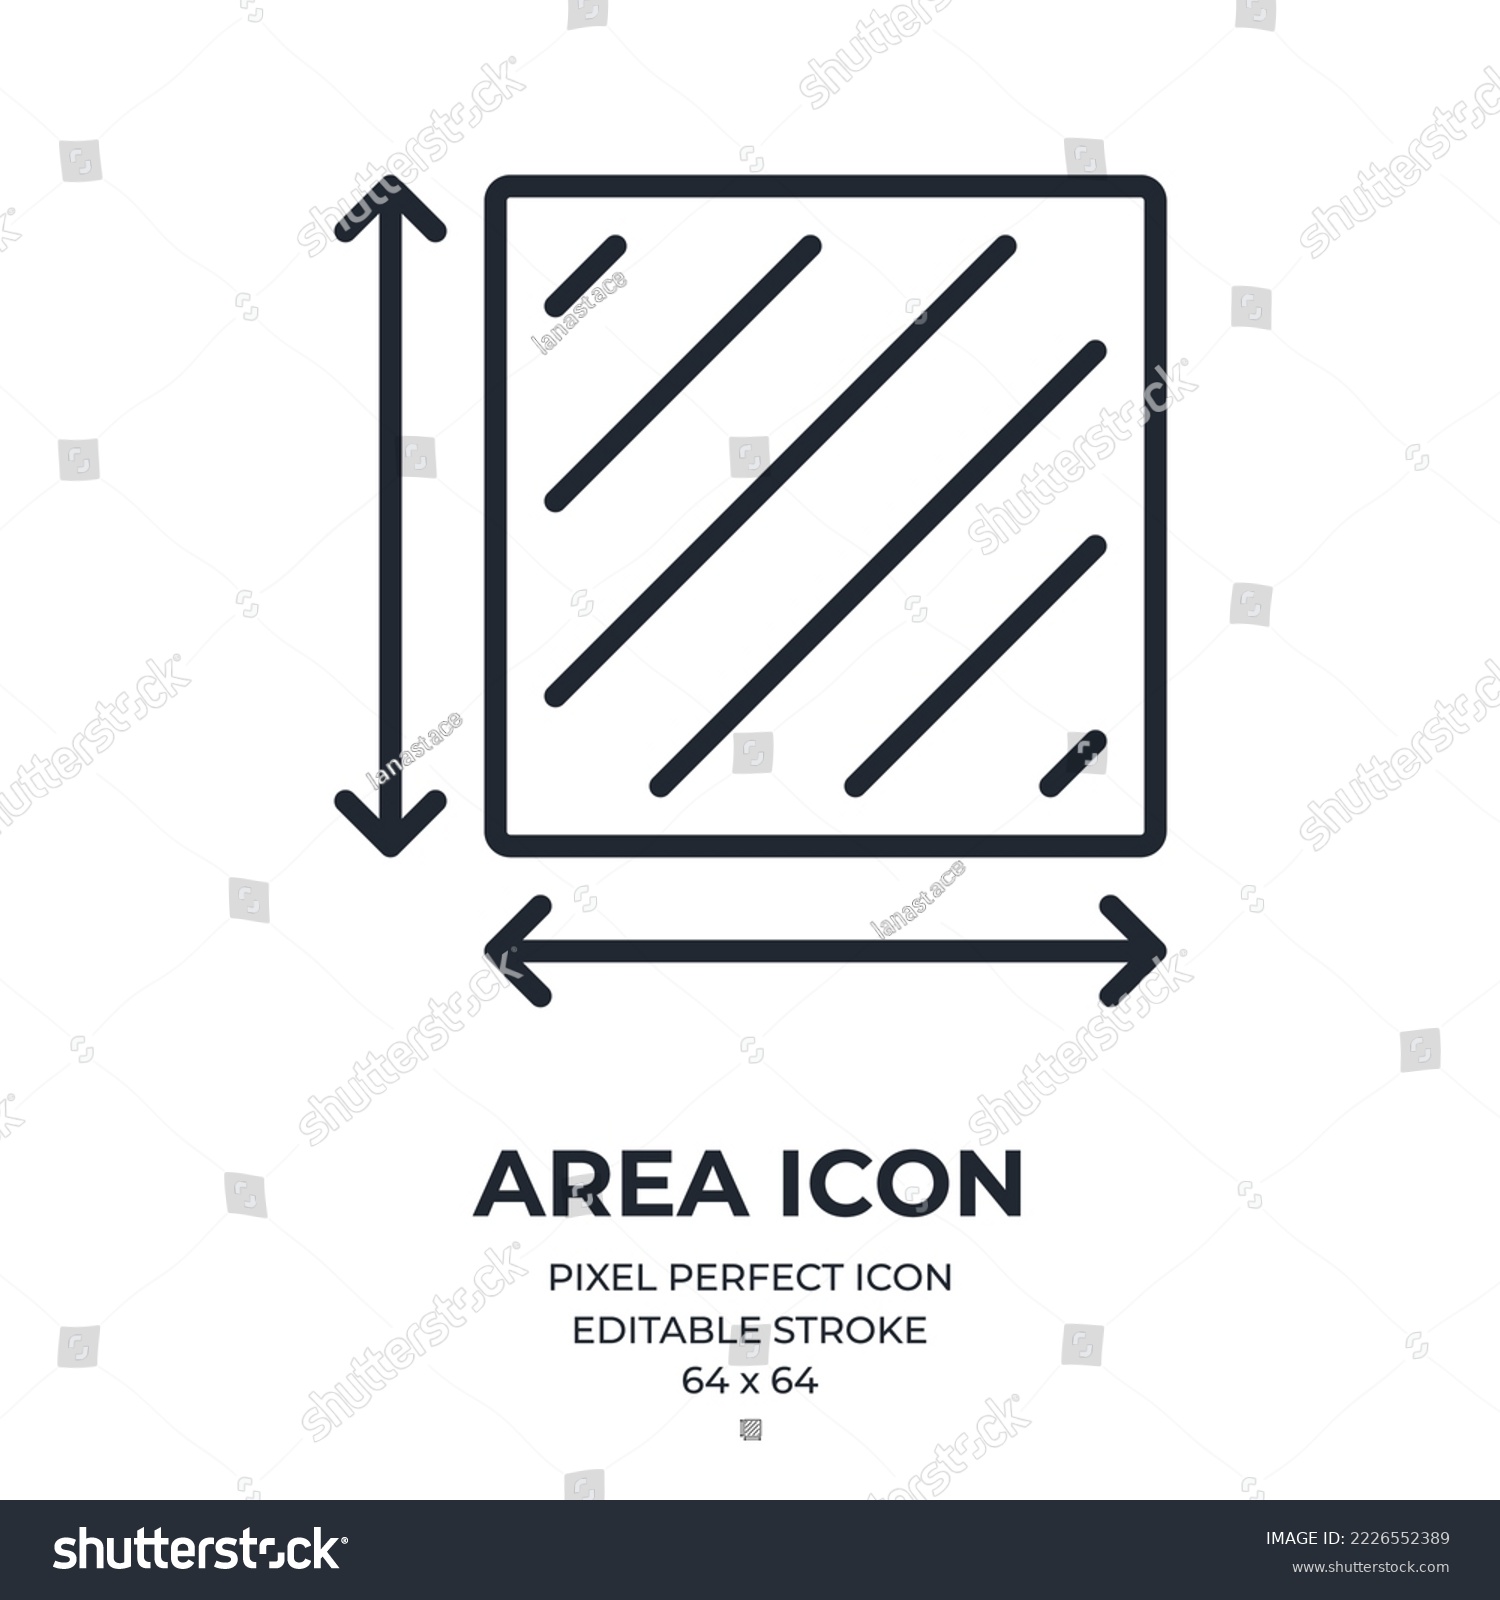 Area and dimension concept editable stroke outline icon isolated on white background flat vector illustration. Pixel perfect. 64 x 64. #2226552389